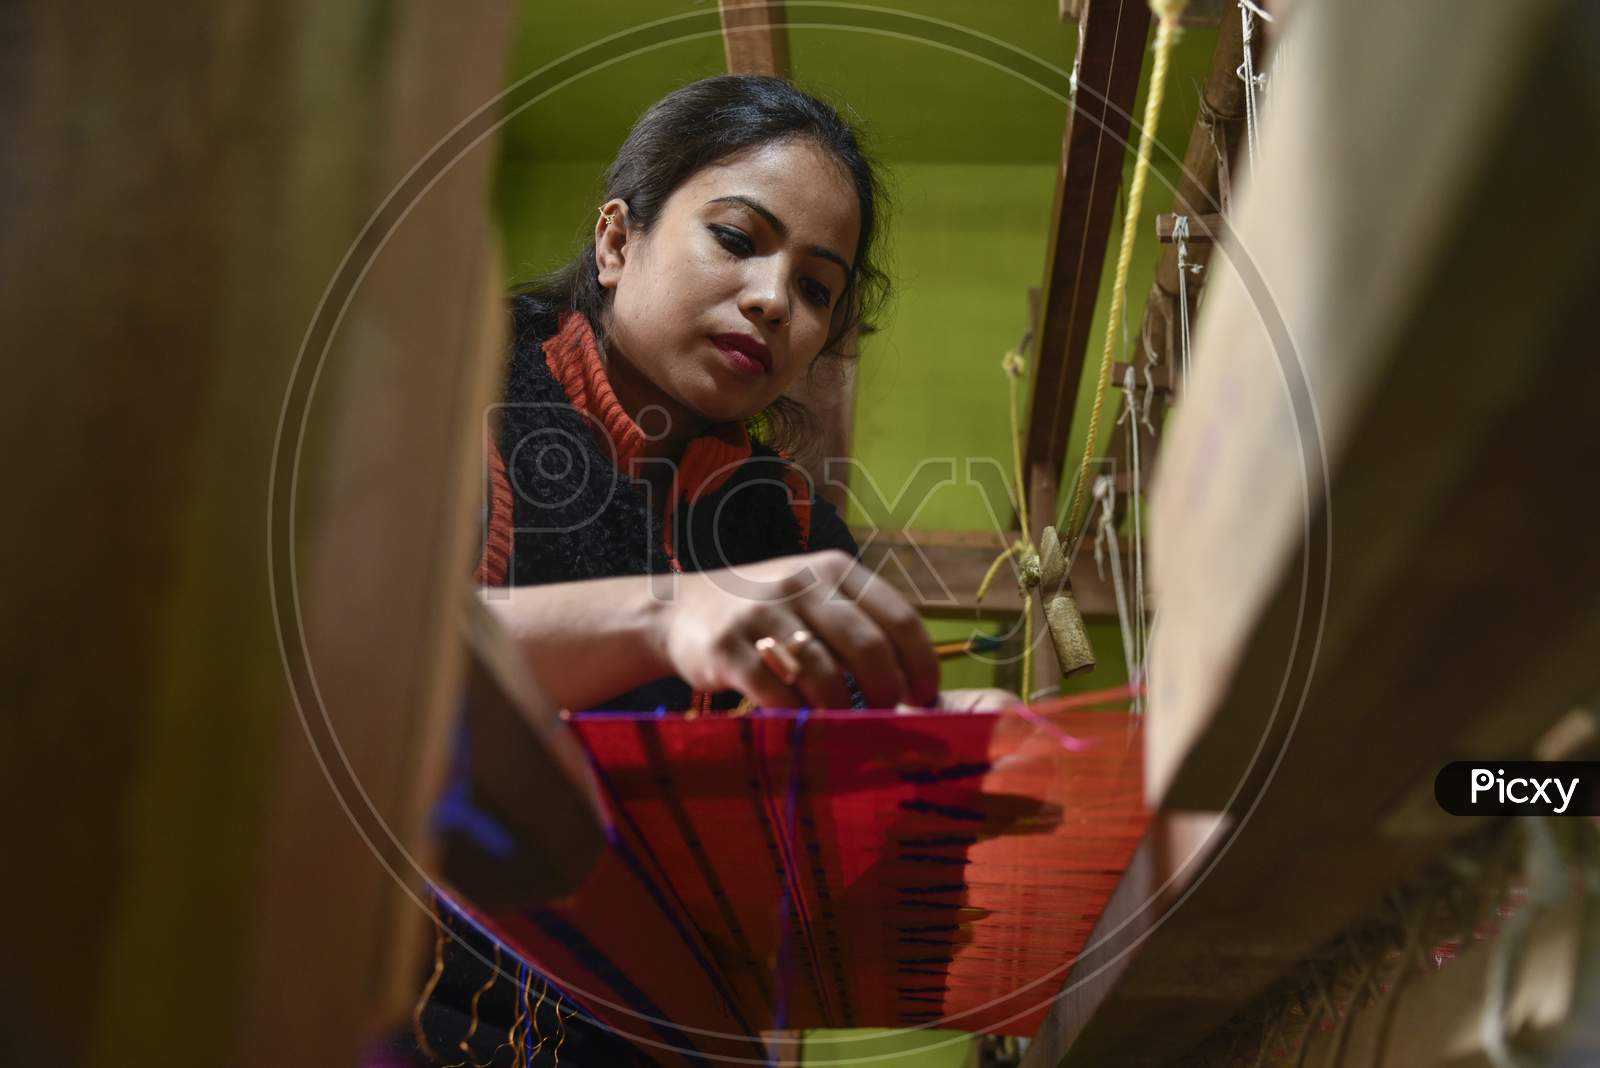 Women Weaving Assamese Silk Costumes In A Traditional Method In A Manufacturing Unit At Nagaon, Assam.